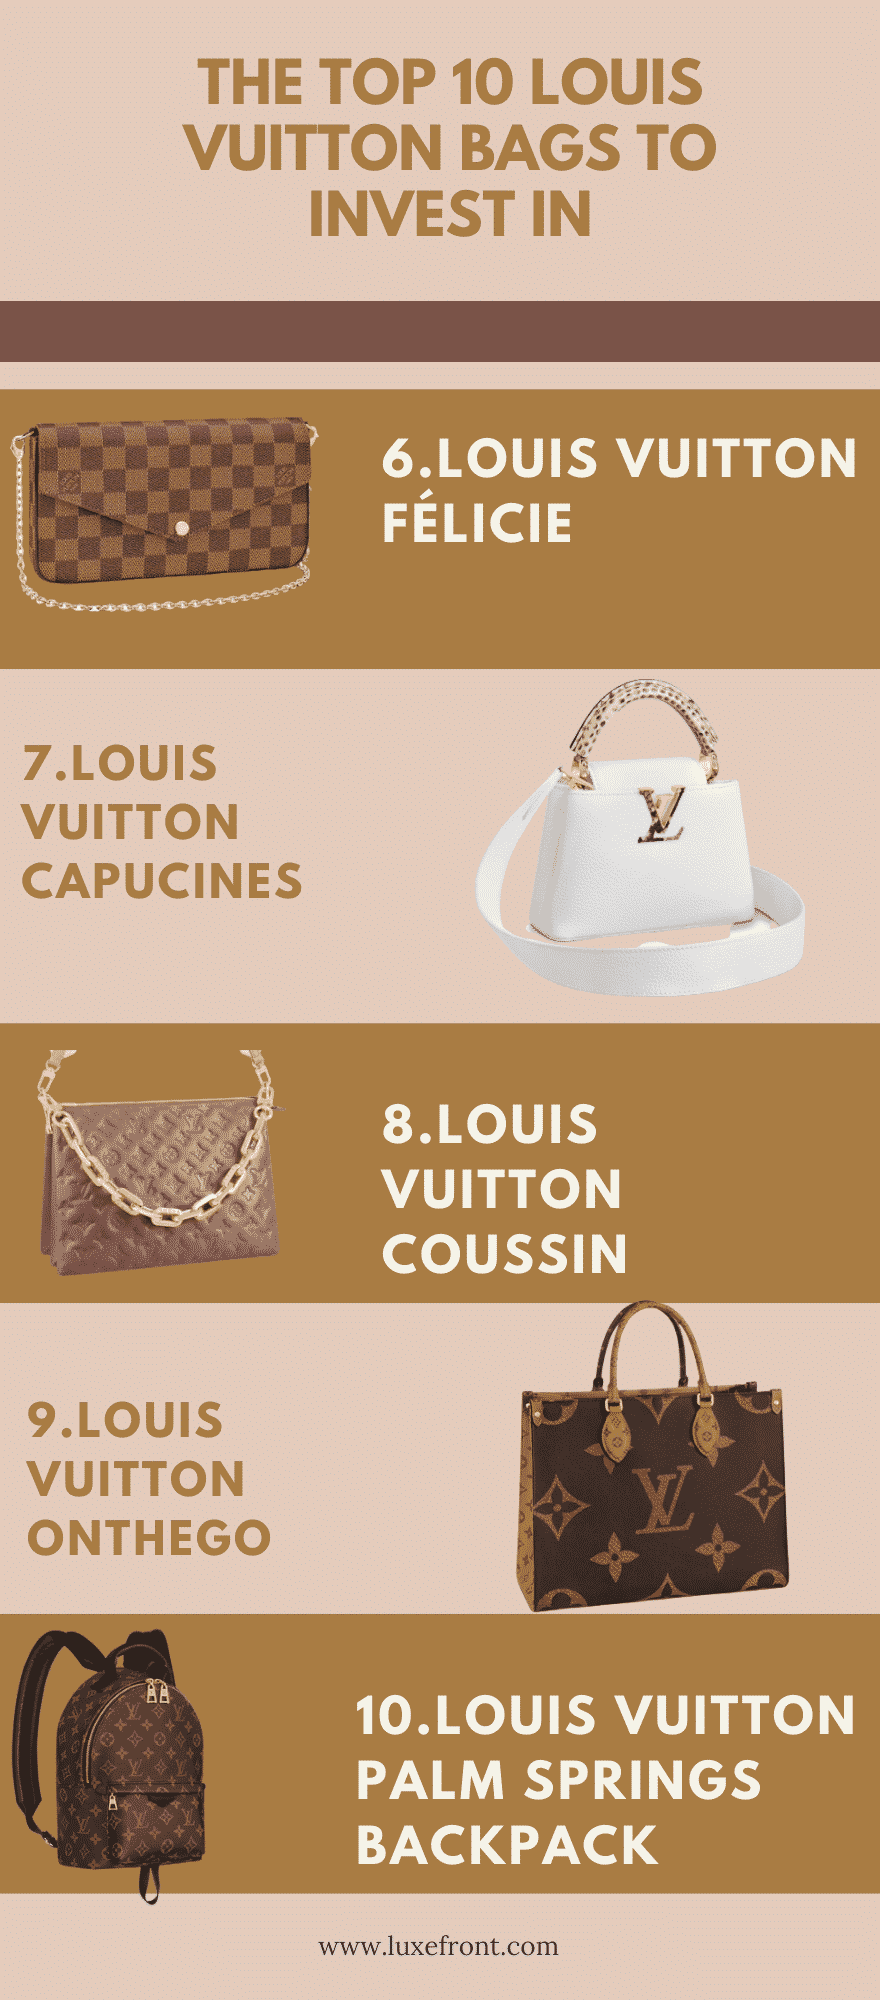 infographic - the best louis vuitton bags to invest in